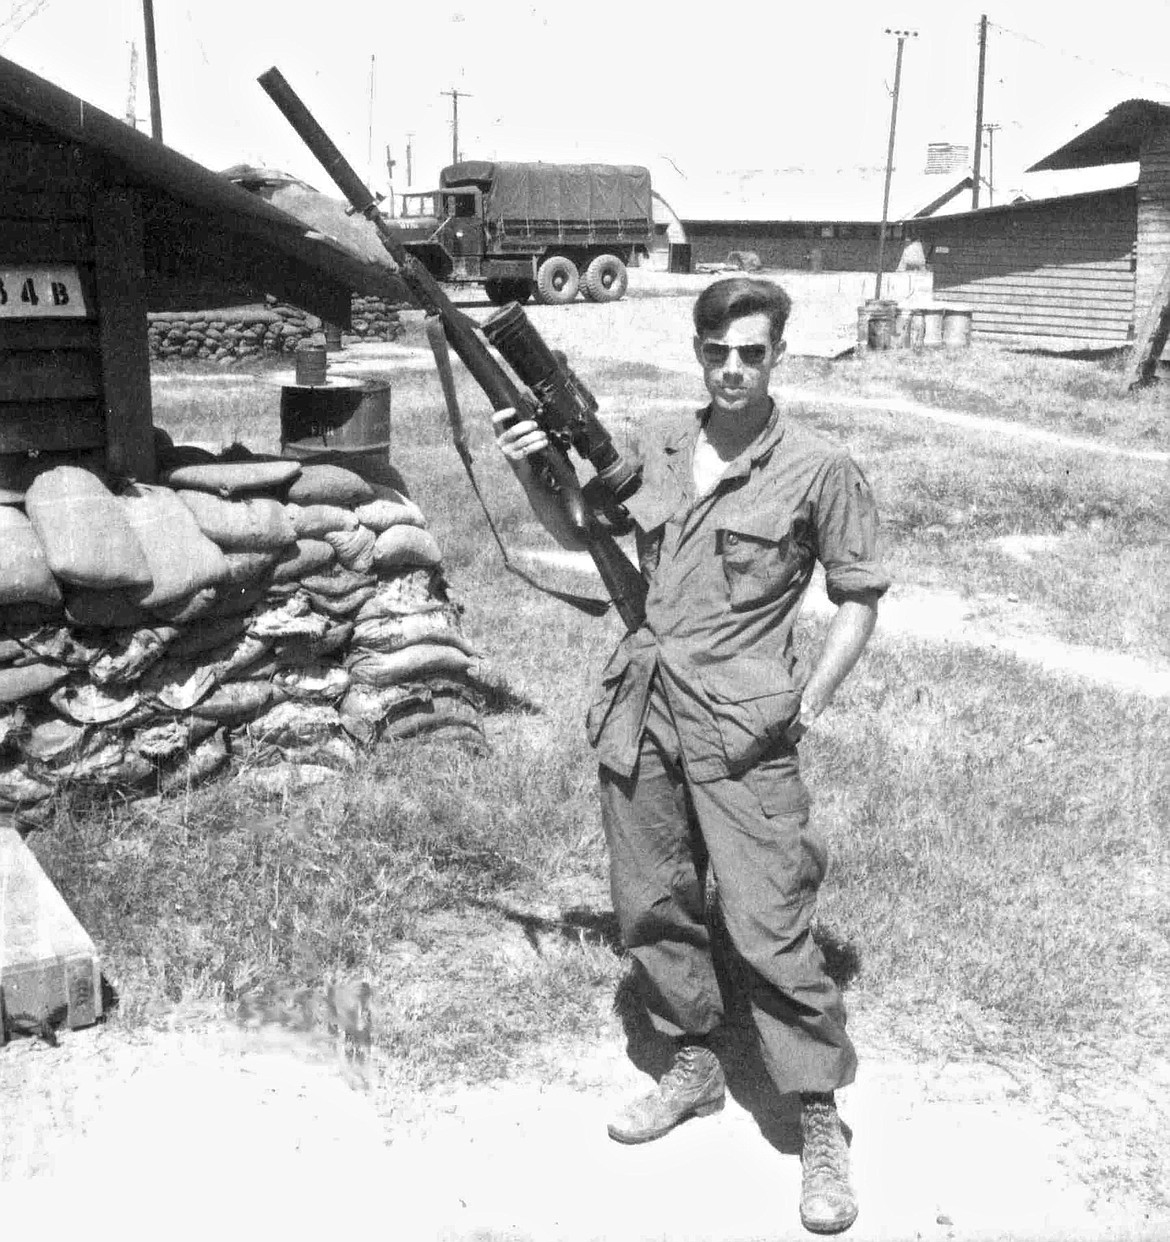 U.S. Army sniper Adelbert N. Waldron had 109 confirmed kills during his eight-month tour in the Vietnam War.